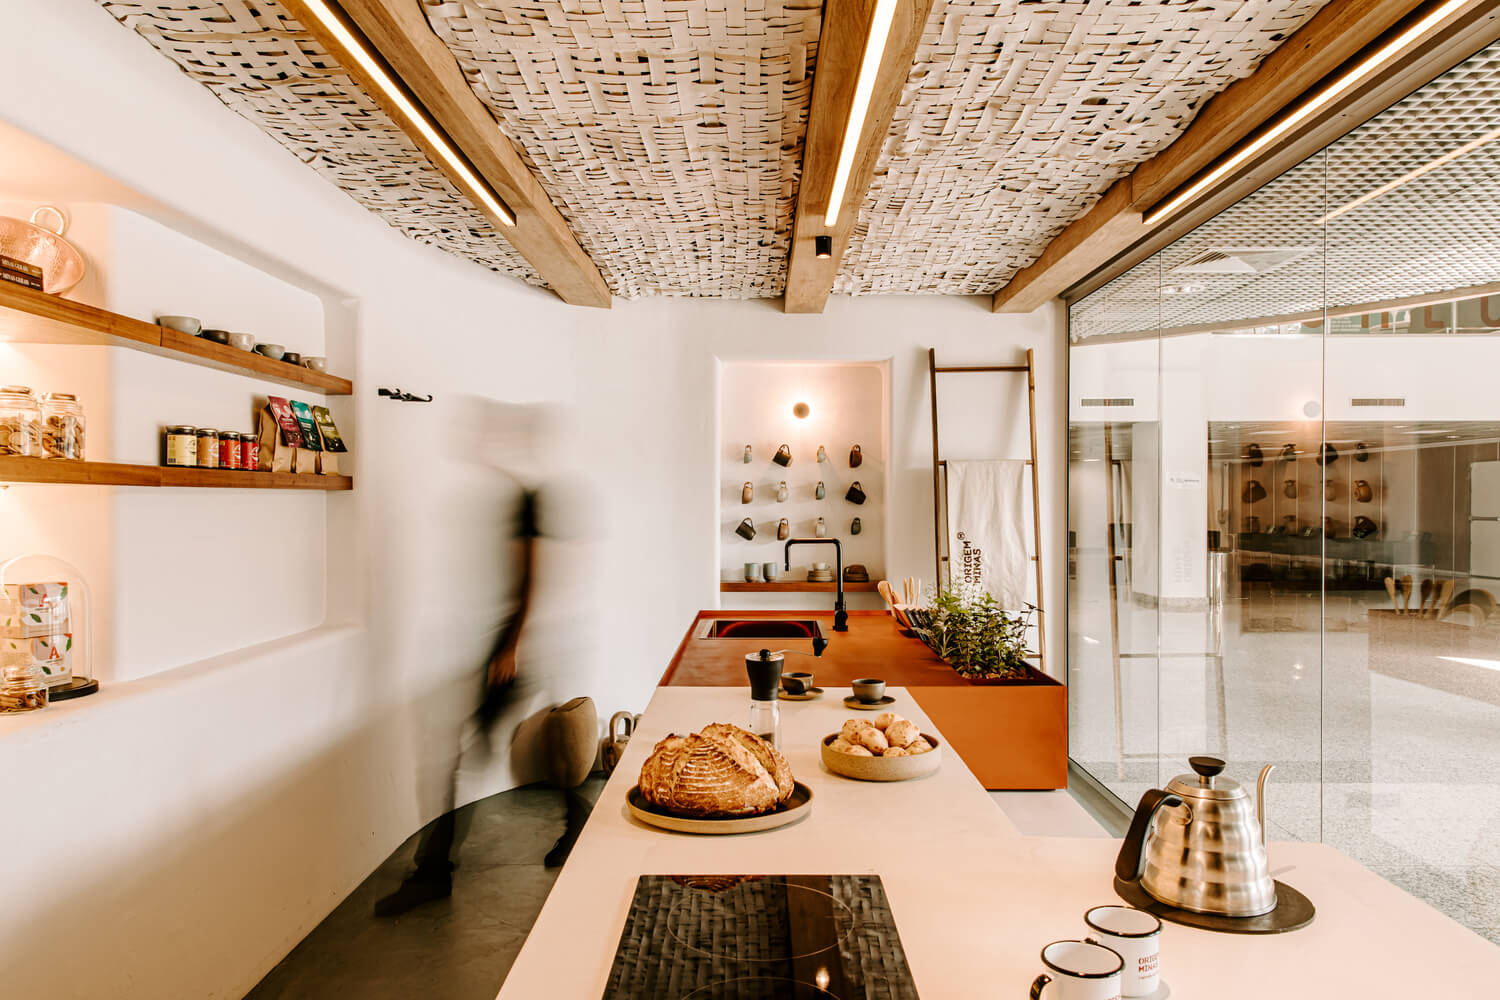  Surface-mounted LED ceiling lights on the wooden beams of this small café provide task-focused illumination with wet location and IP ratings for safe food preparation